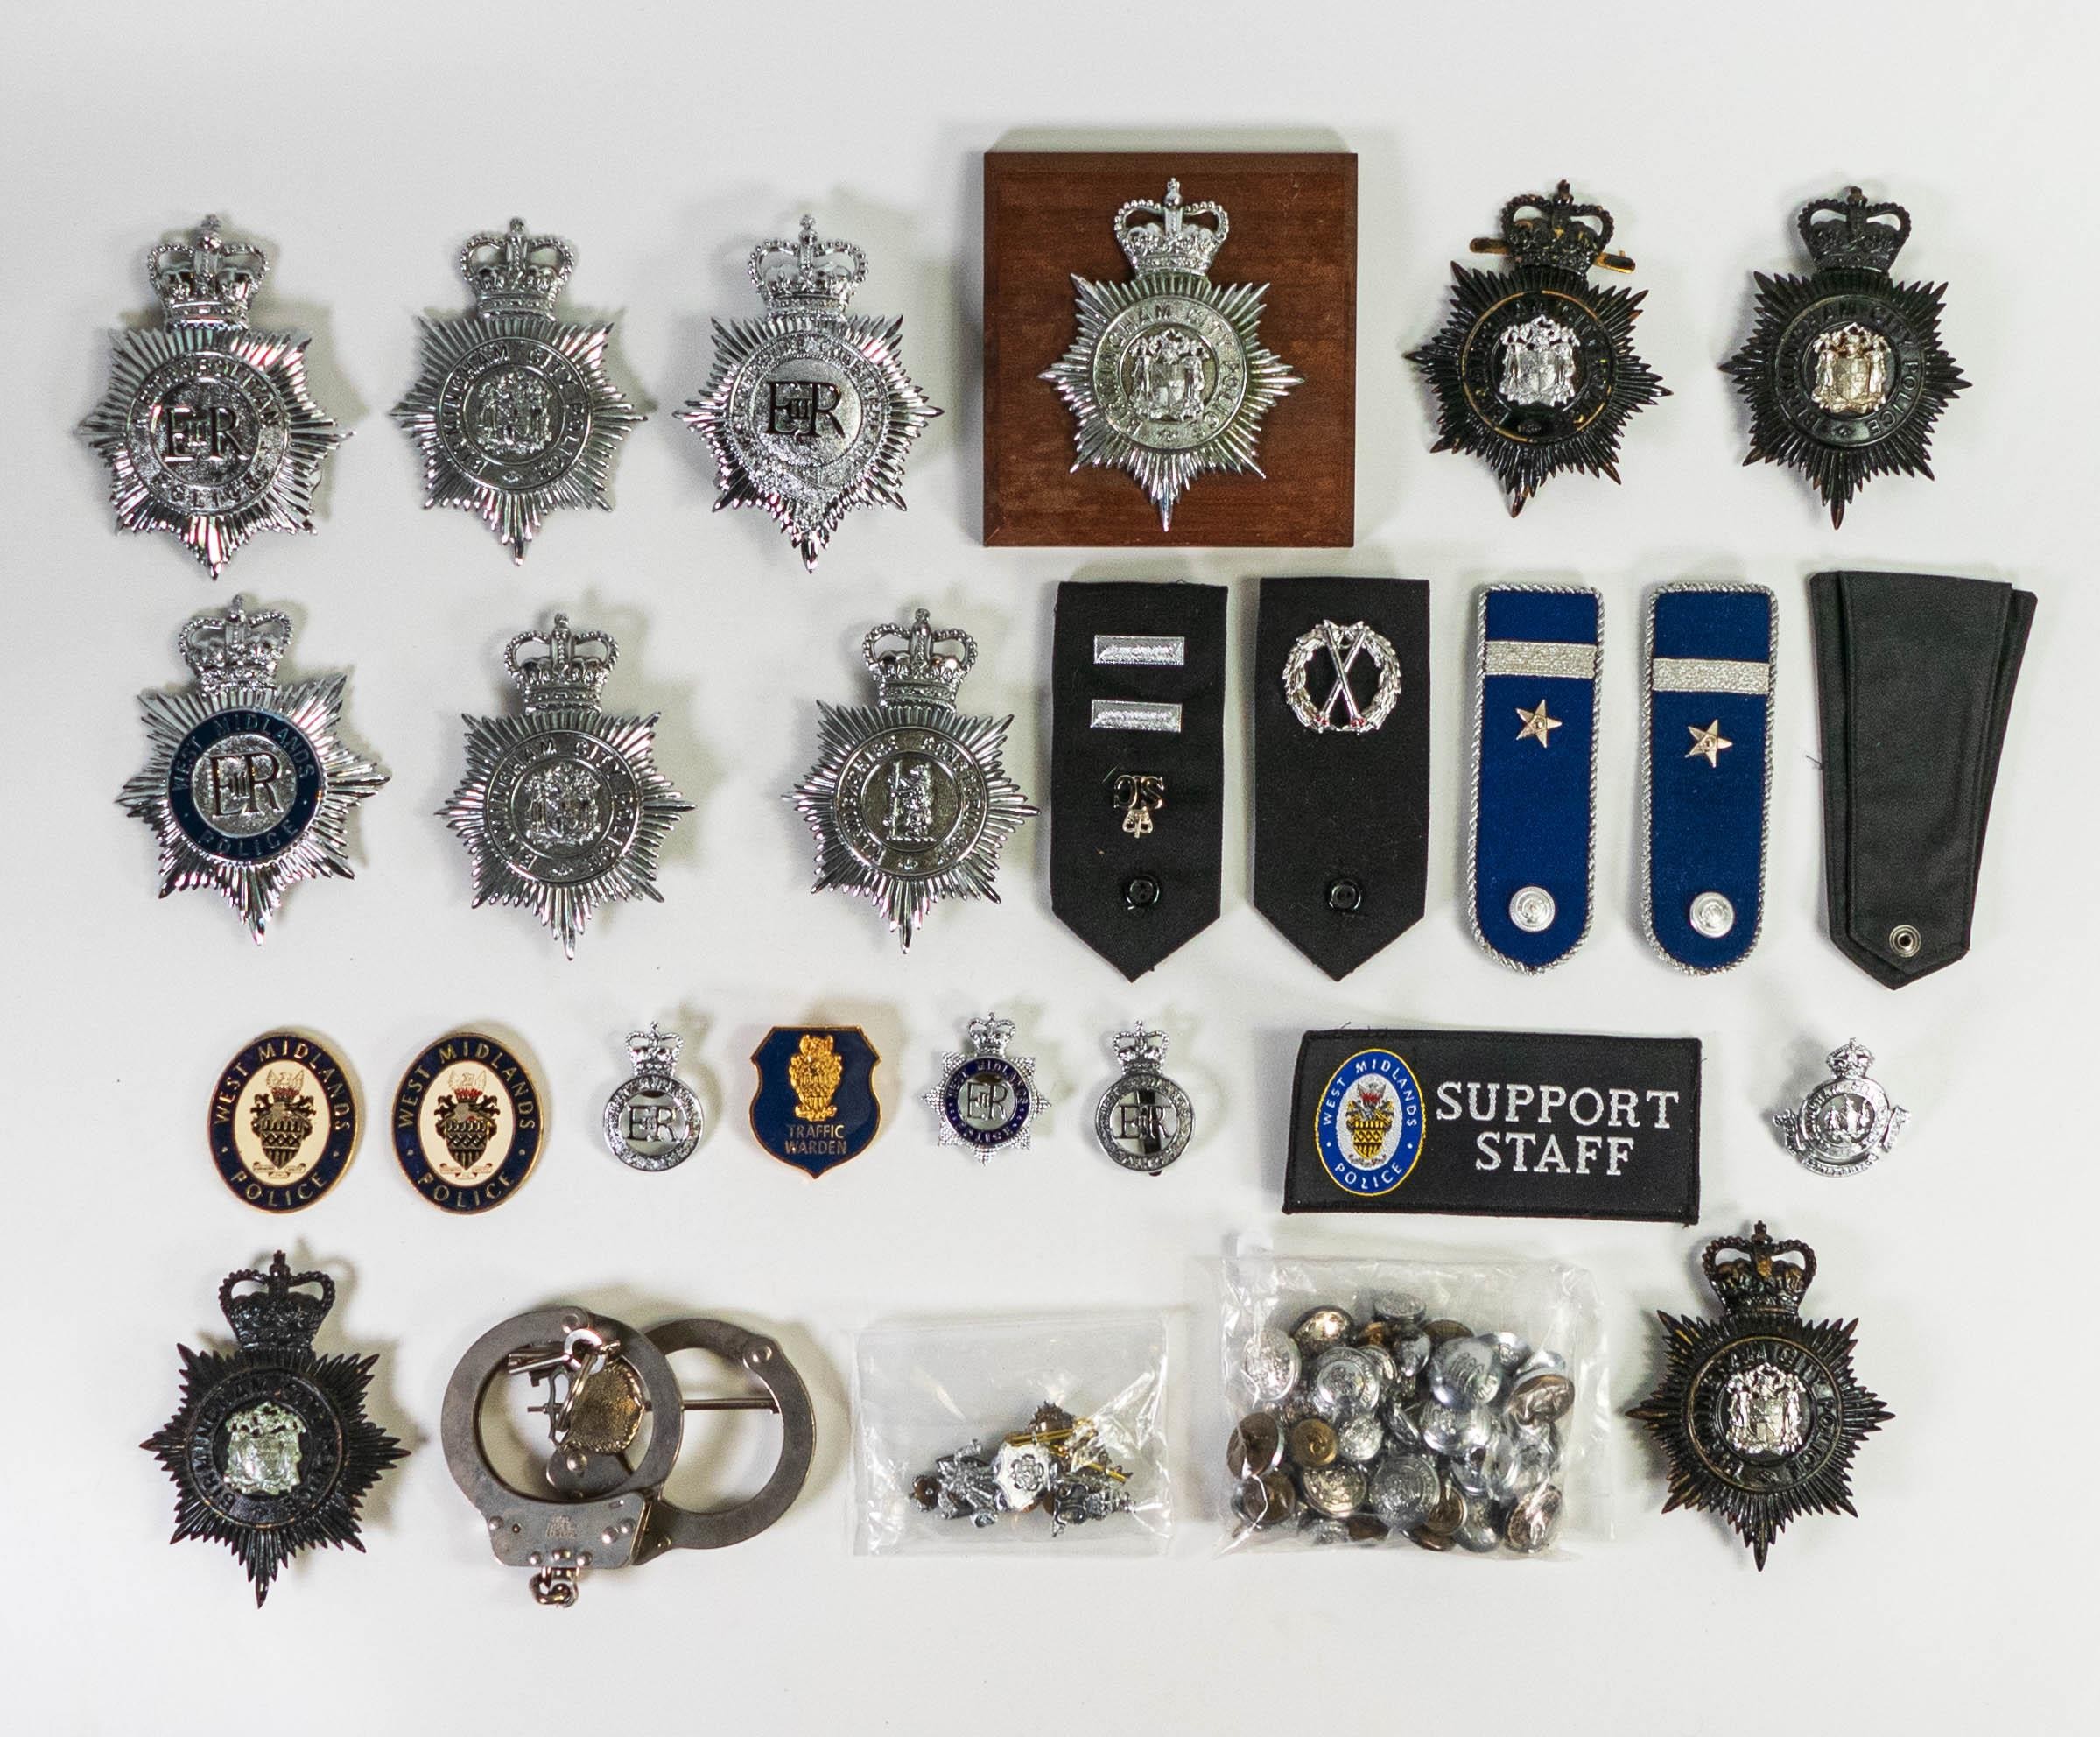 A good collection of vintage police badges, patches, buttons etc.